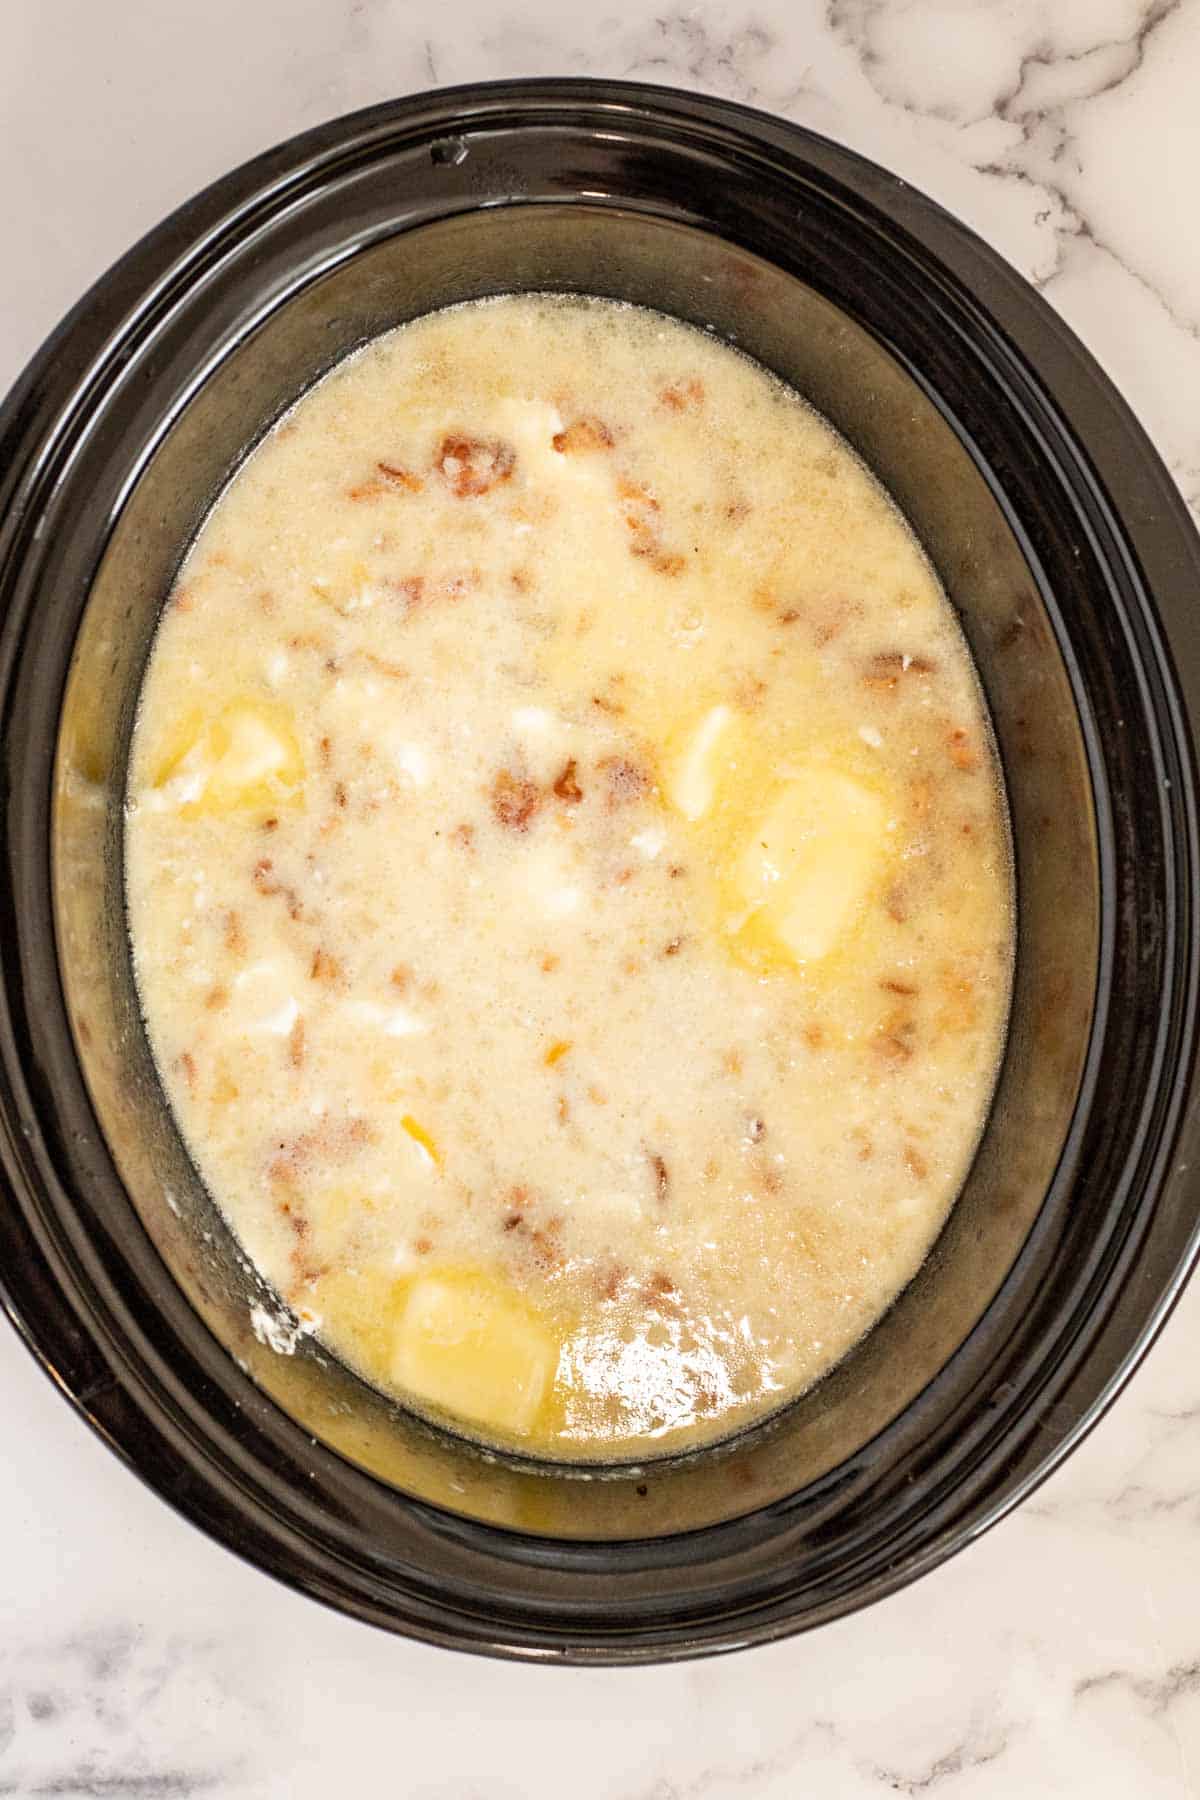 A black slow cooker containing the creamy potato soup after milk has been added.